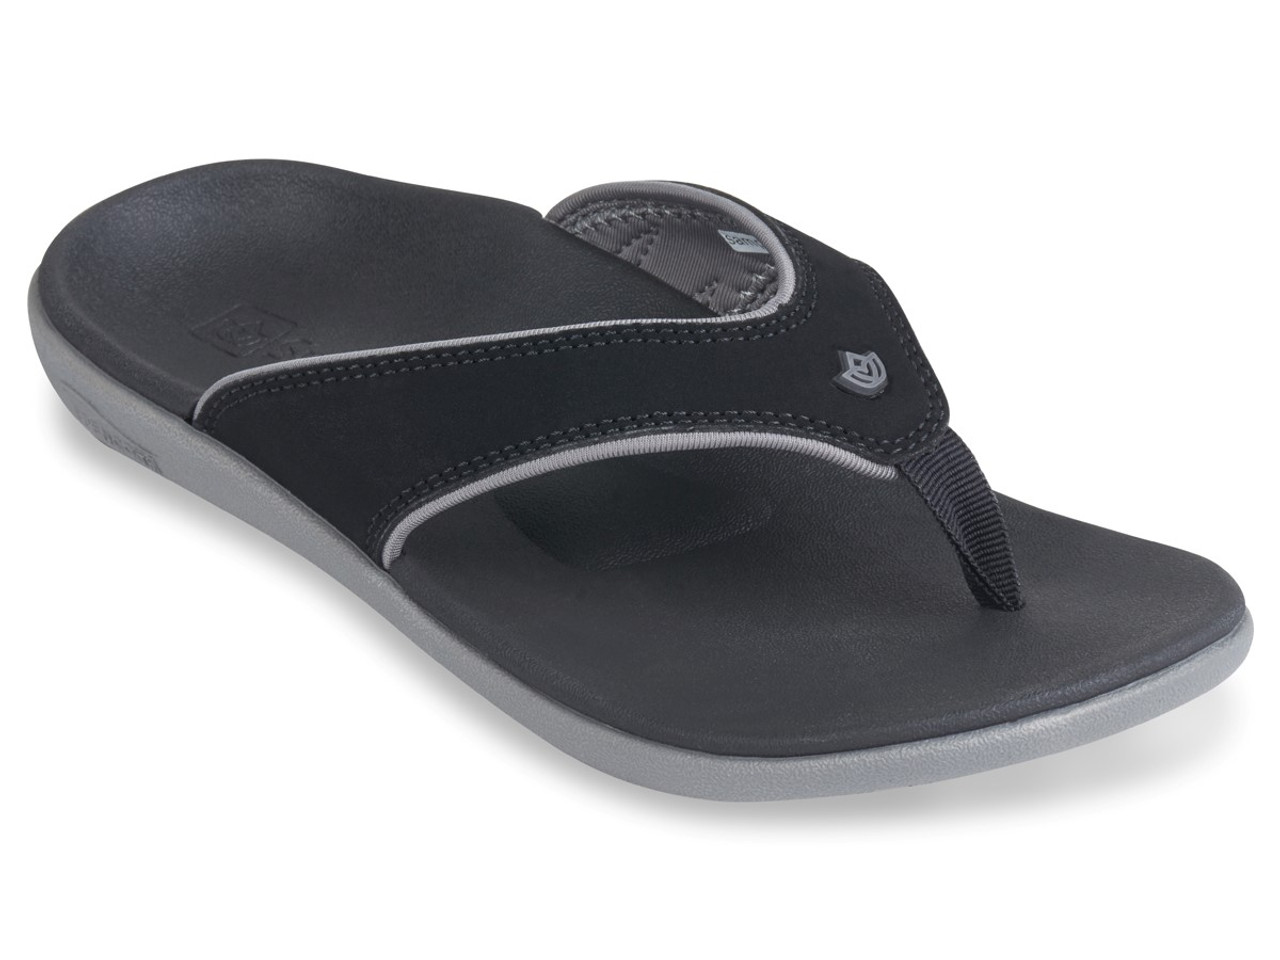 Spenco Total Support Sandals, Yumi 